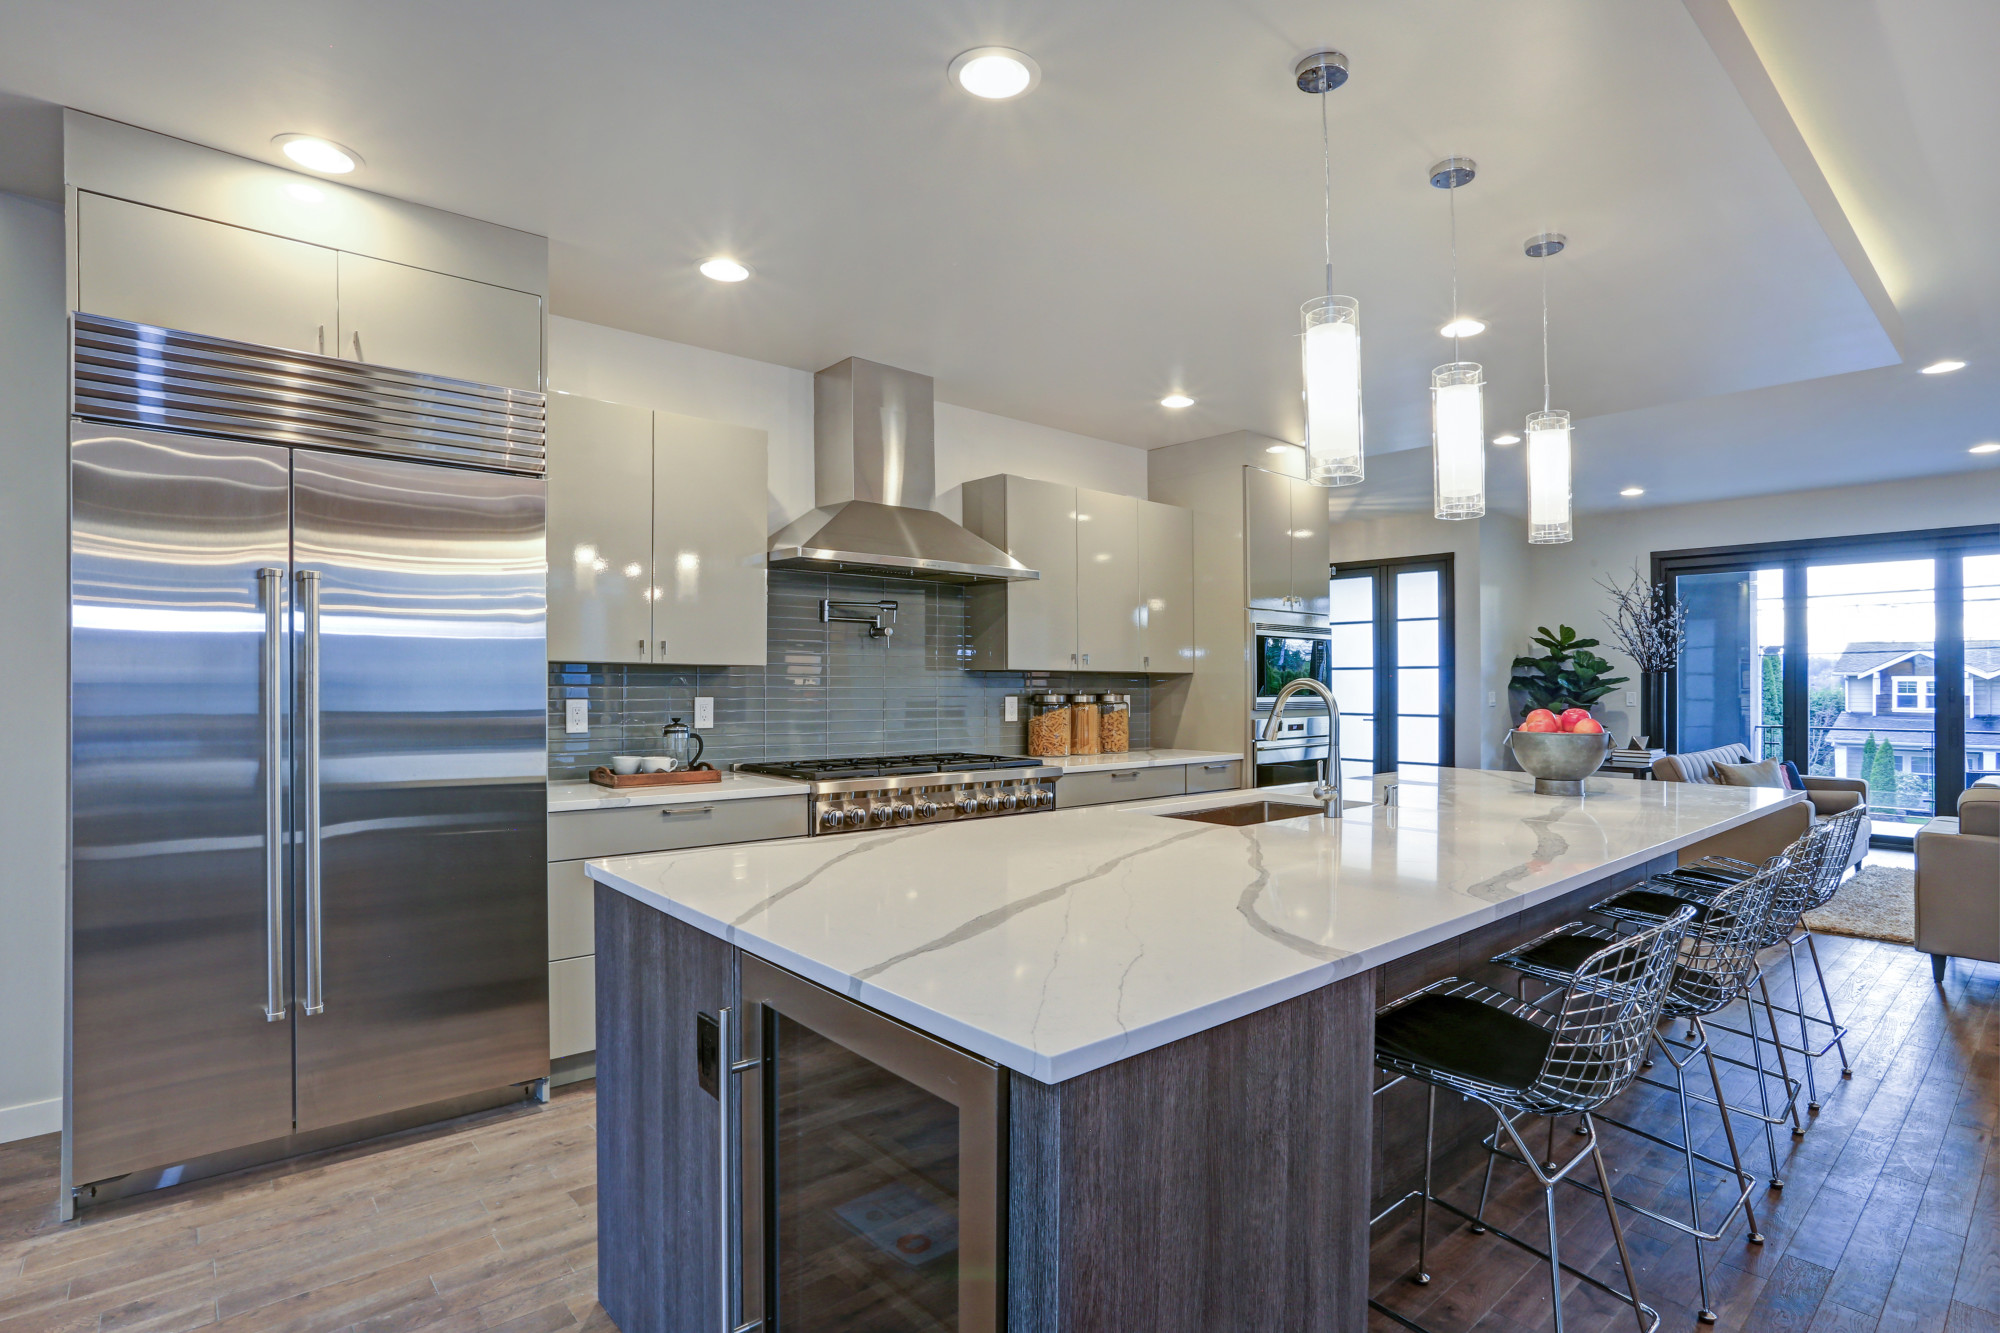 How to decorate large and small kitchens efficiently - AZ Big Media